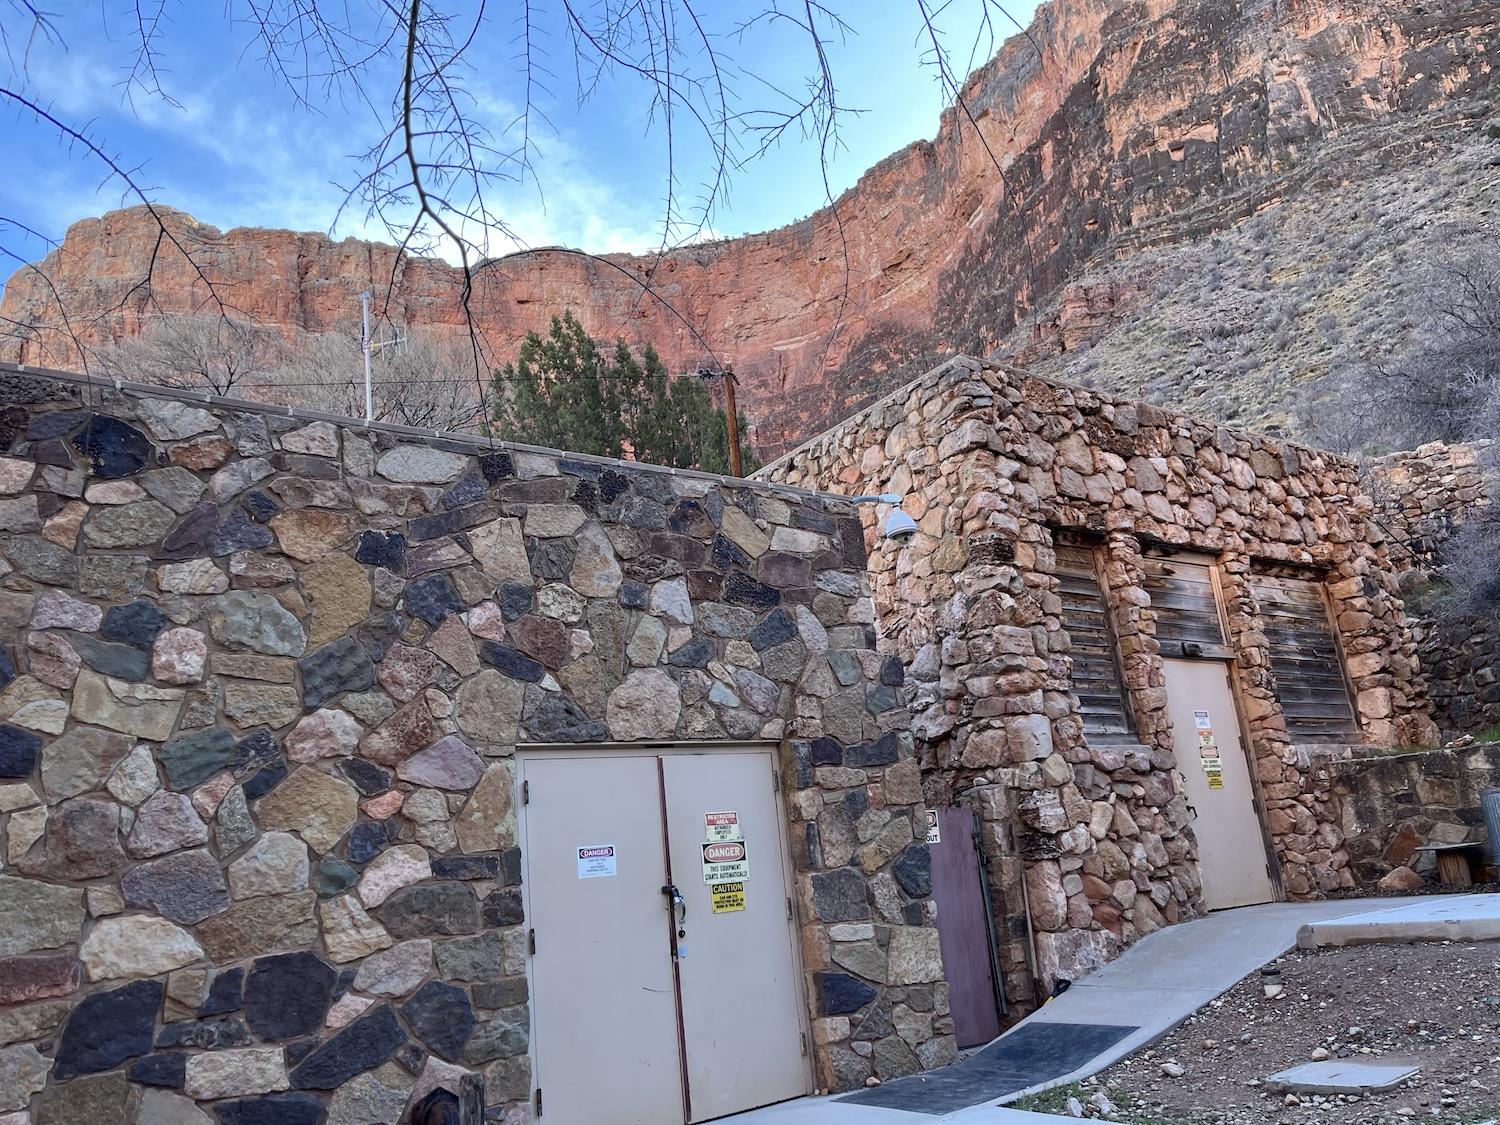 This is the pump station for water going up to the South Rim, some electrical and back-up electrical service is co-located there but the primary purpose is to pump water.